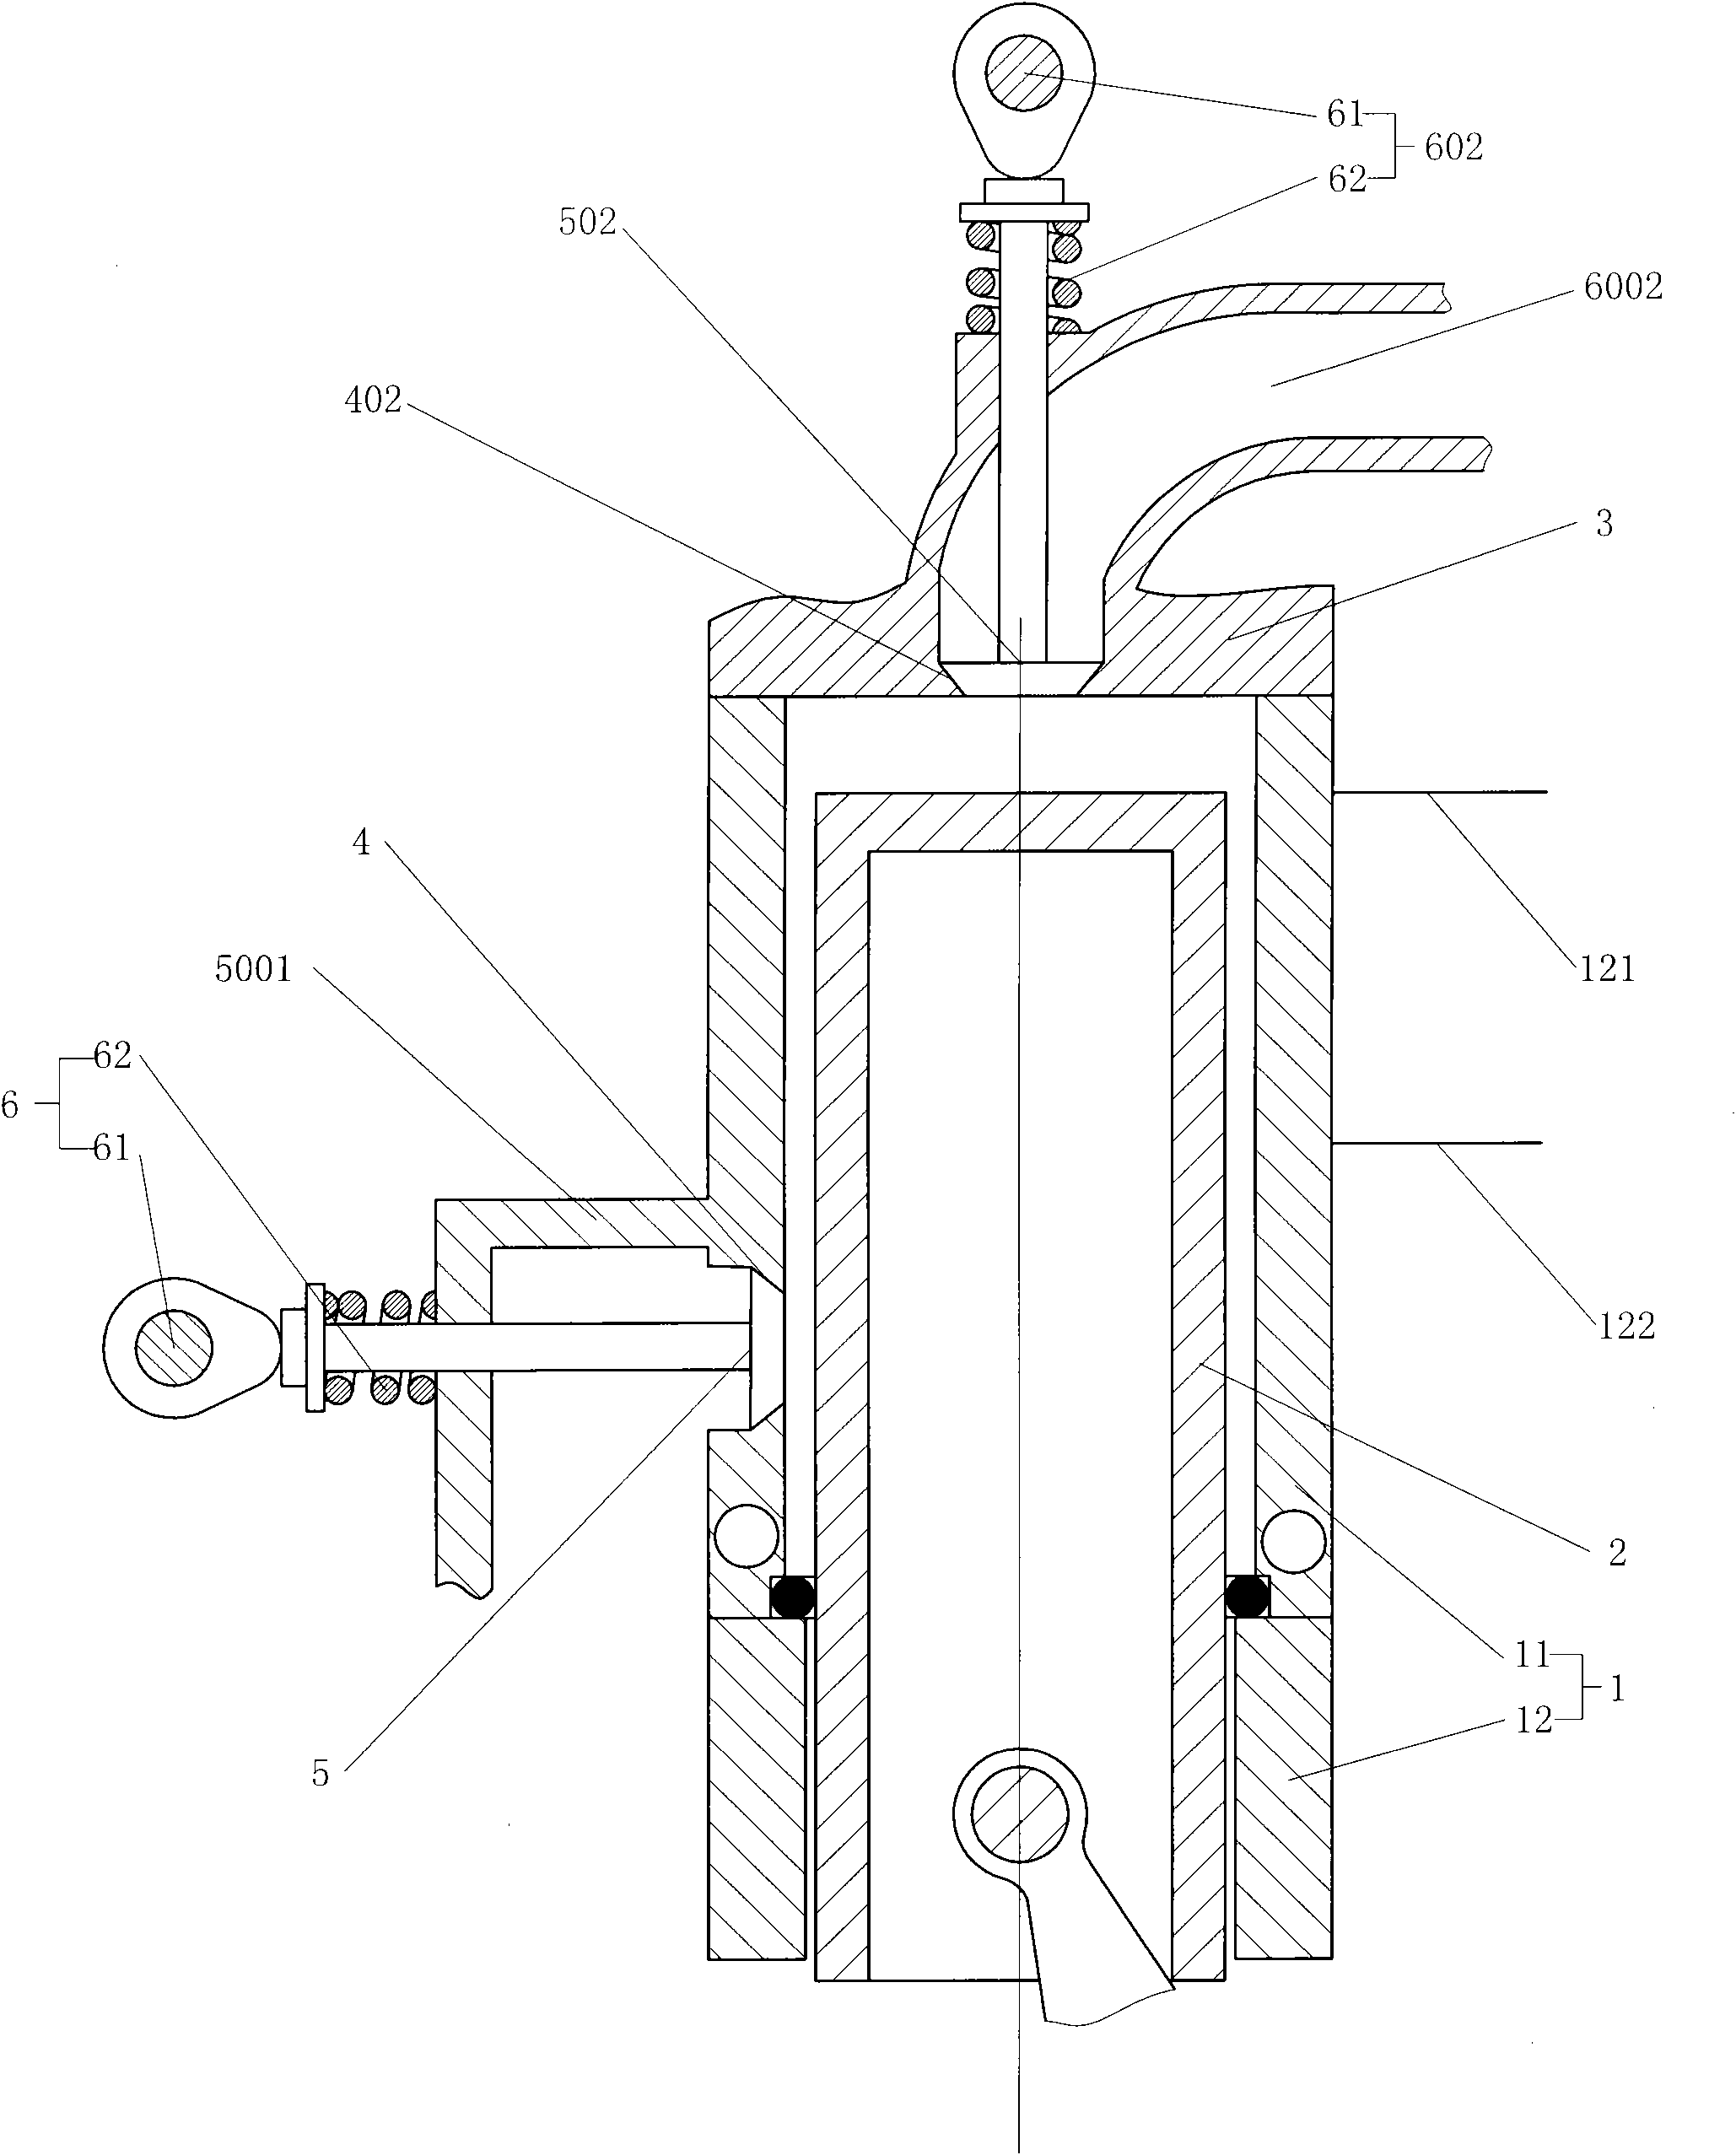 Right-angled distribution engine with suspension piston